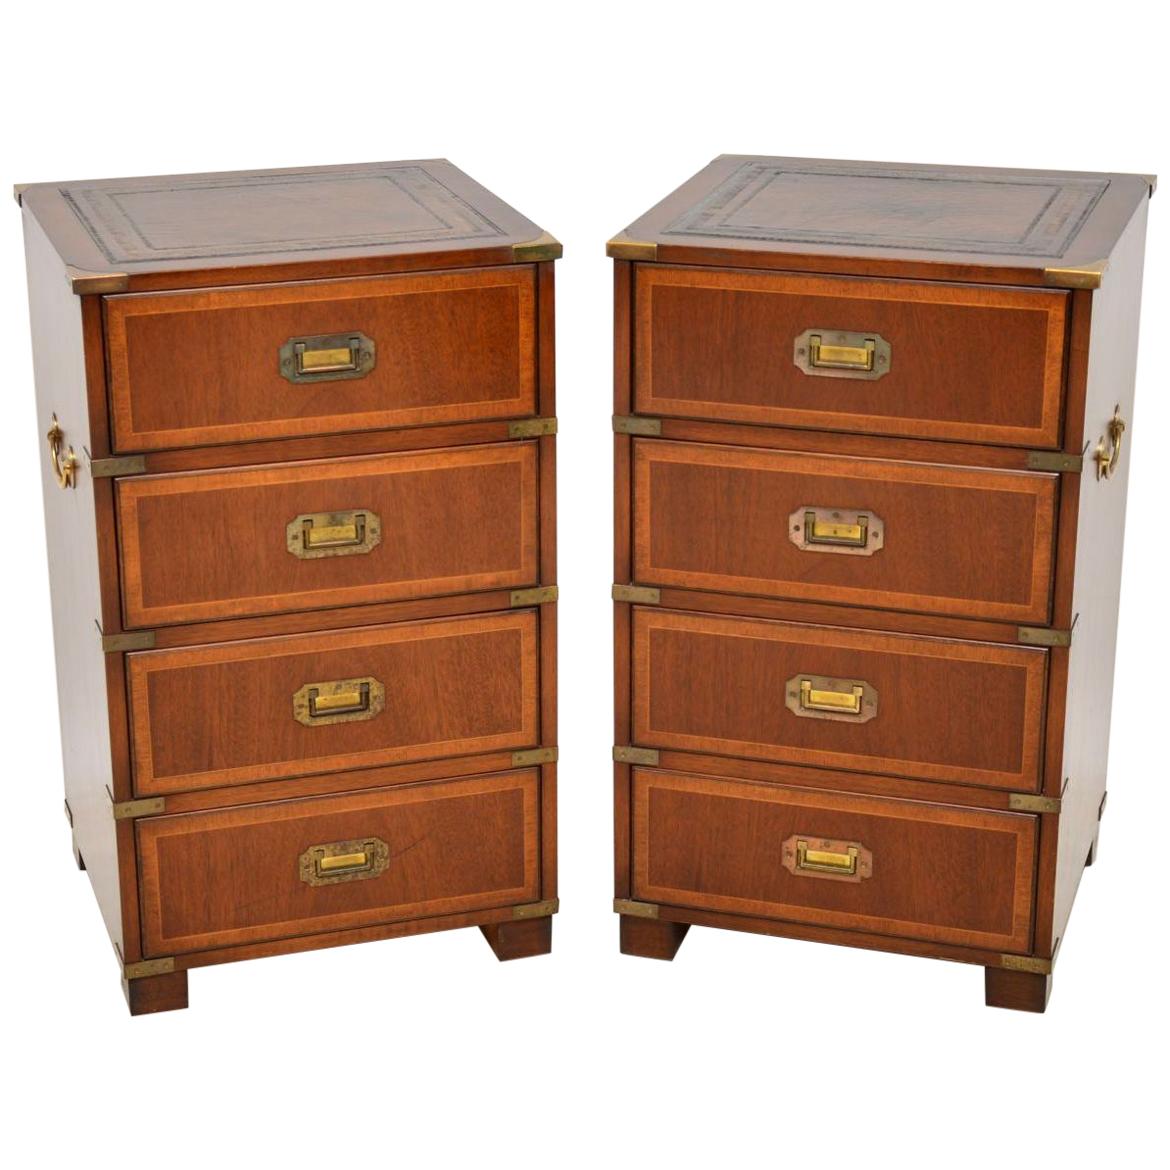 Pair of Antique Mahogany Campaign Style Bedside Chests